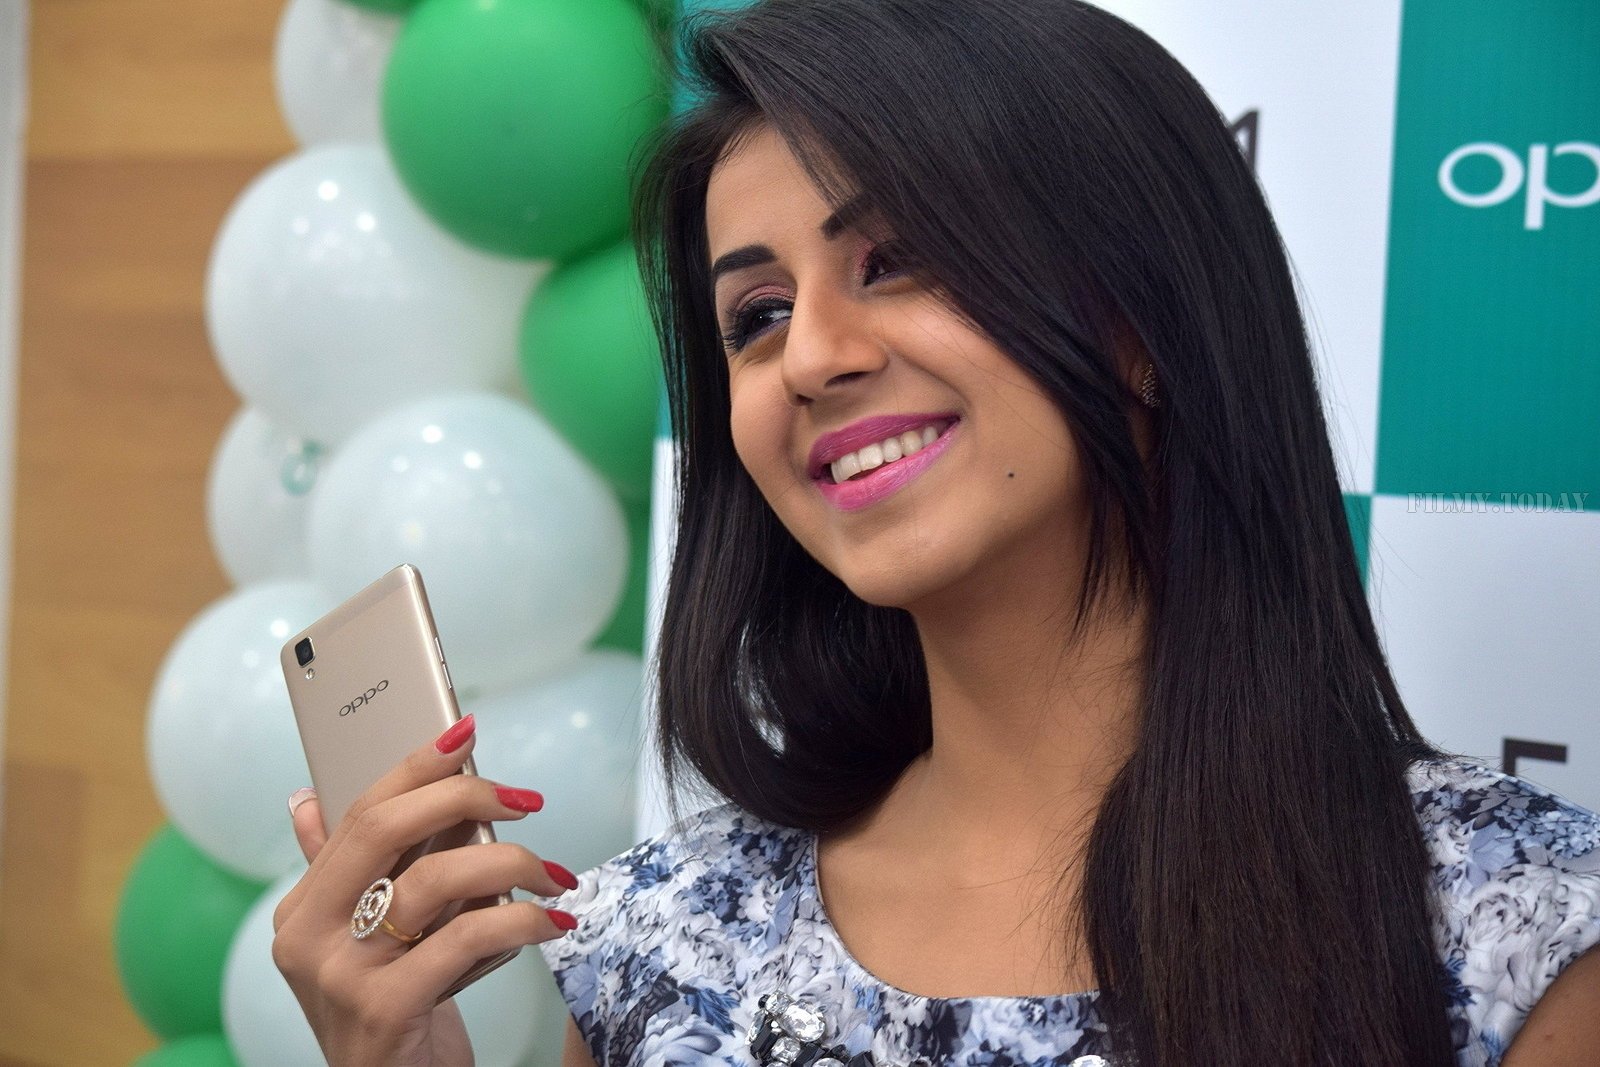 Acress Nikki Galrani during Oppo Phone Event Photos | Picture 1532940